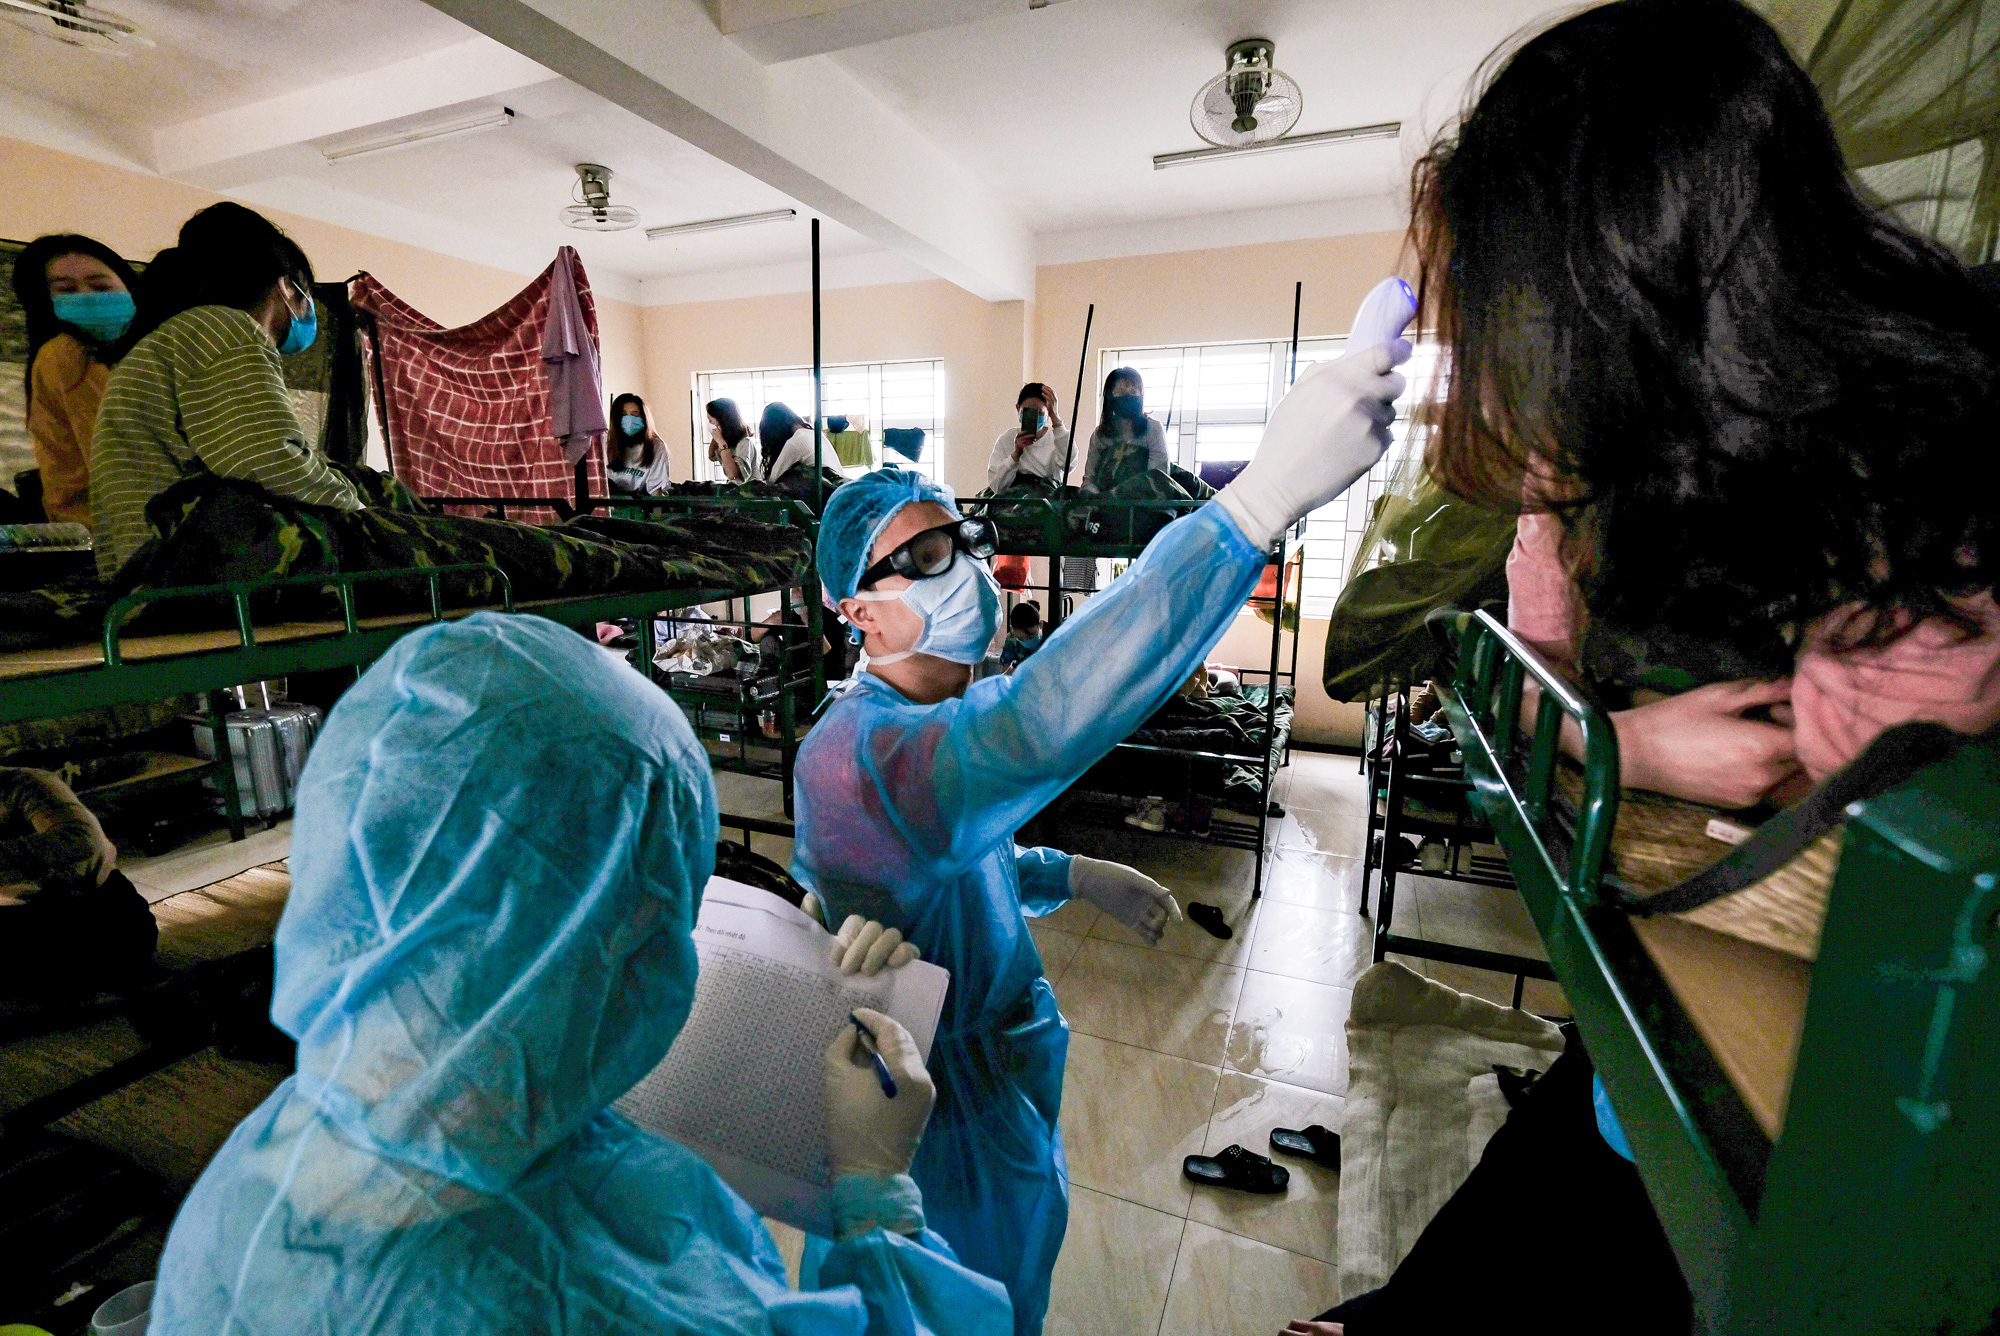 Nguyen Phu Trung goes door to door to measure the body temperature of people isolated at a COVID-19 quarantine facility in Hanoi, Vietnam. Photo: Nam Tran / Tuoi Tre